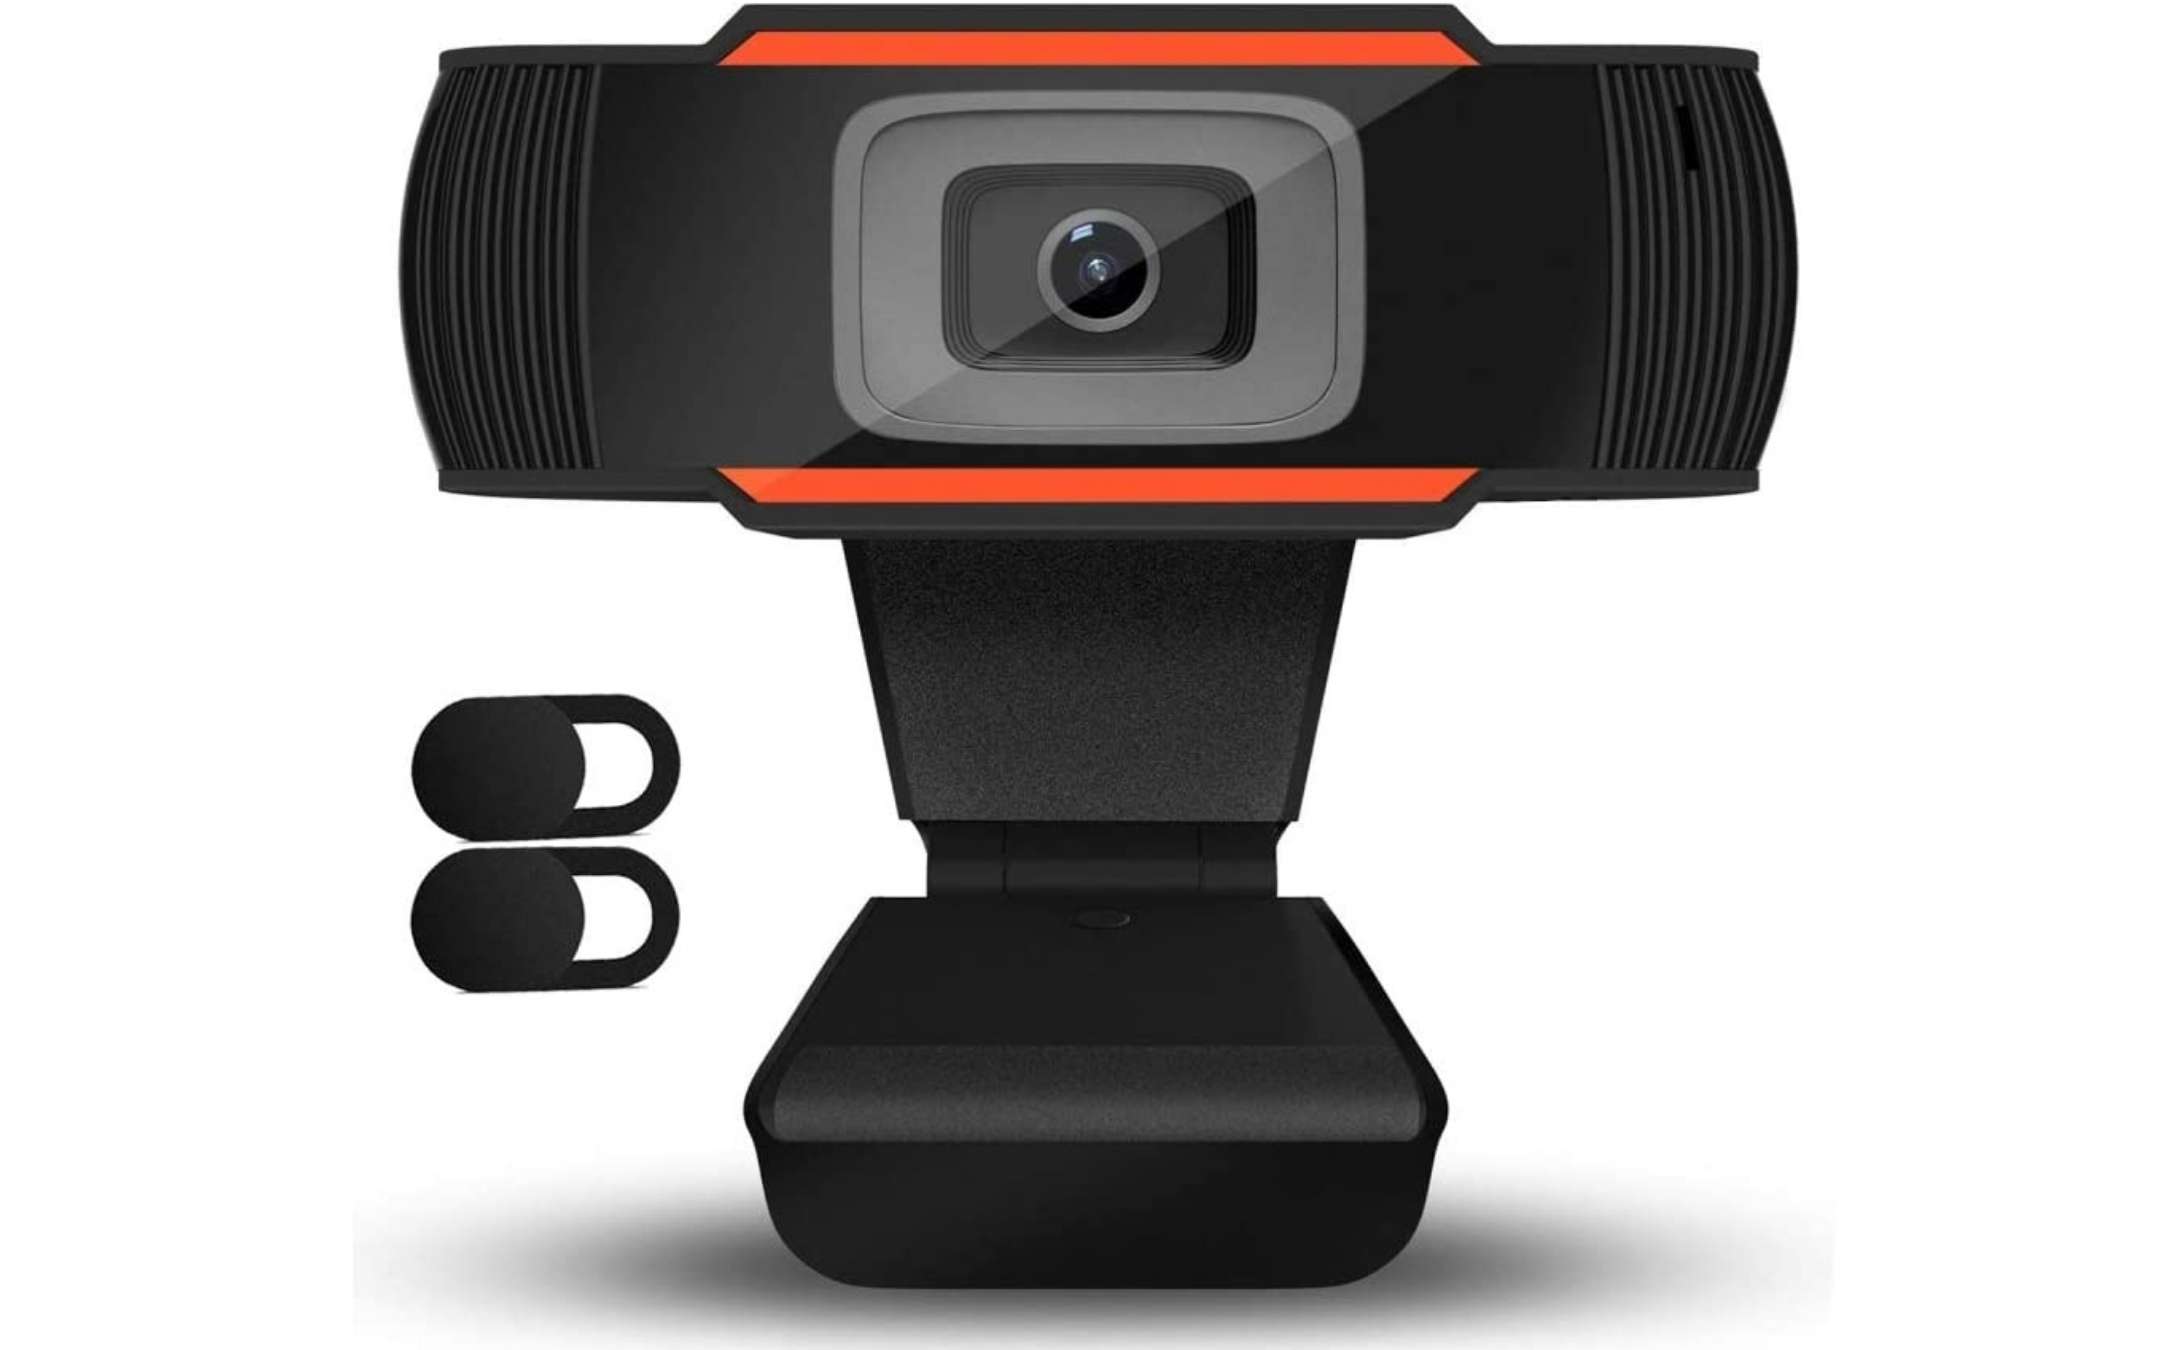 720p webcam with microphone for noise reduction for 11 €